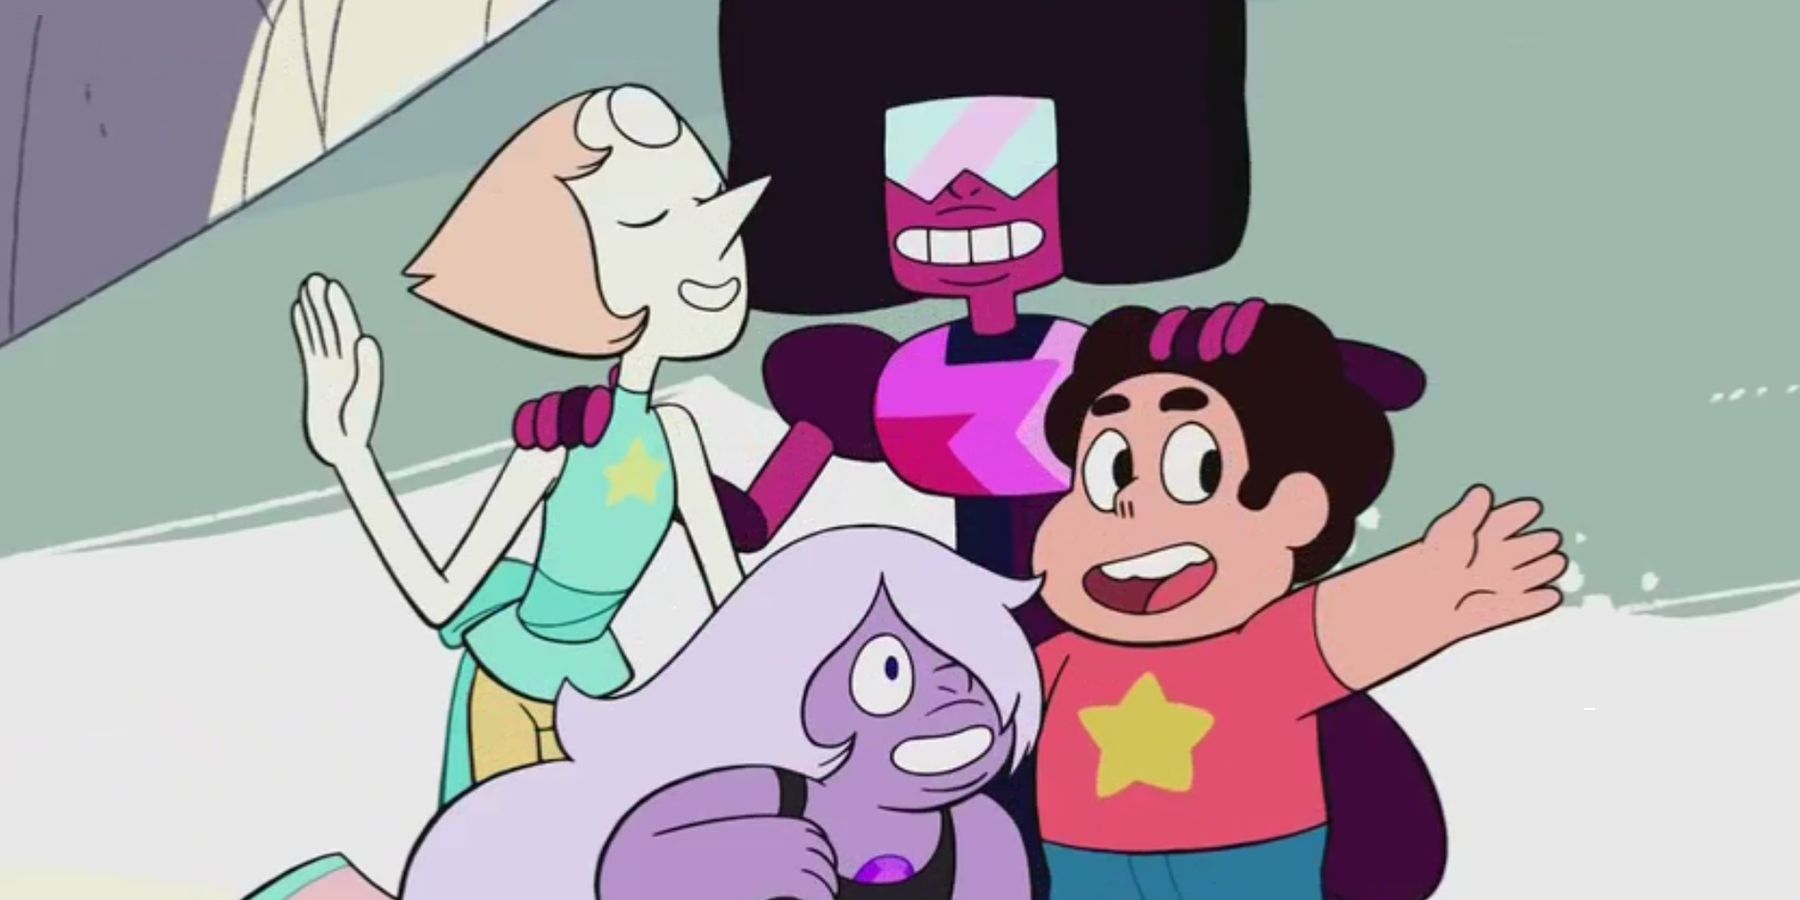 Steven Universe together with Crystal Gems, Garnet, Amethyst, and Pearl.